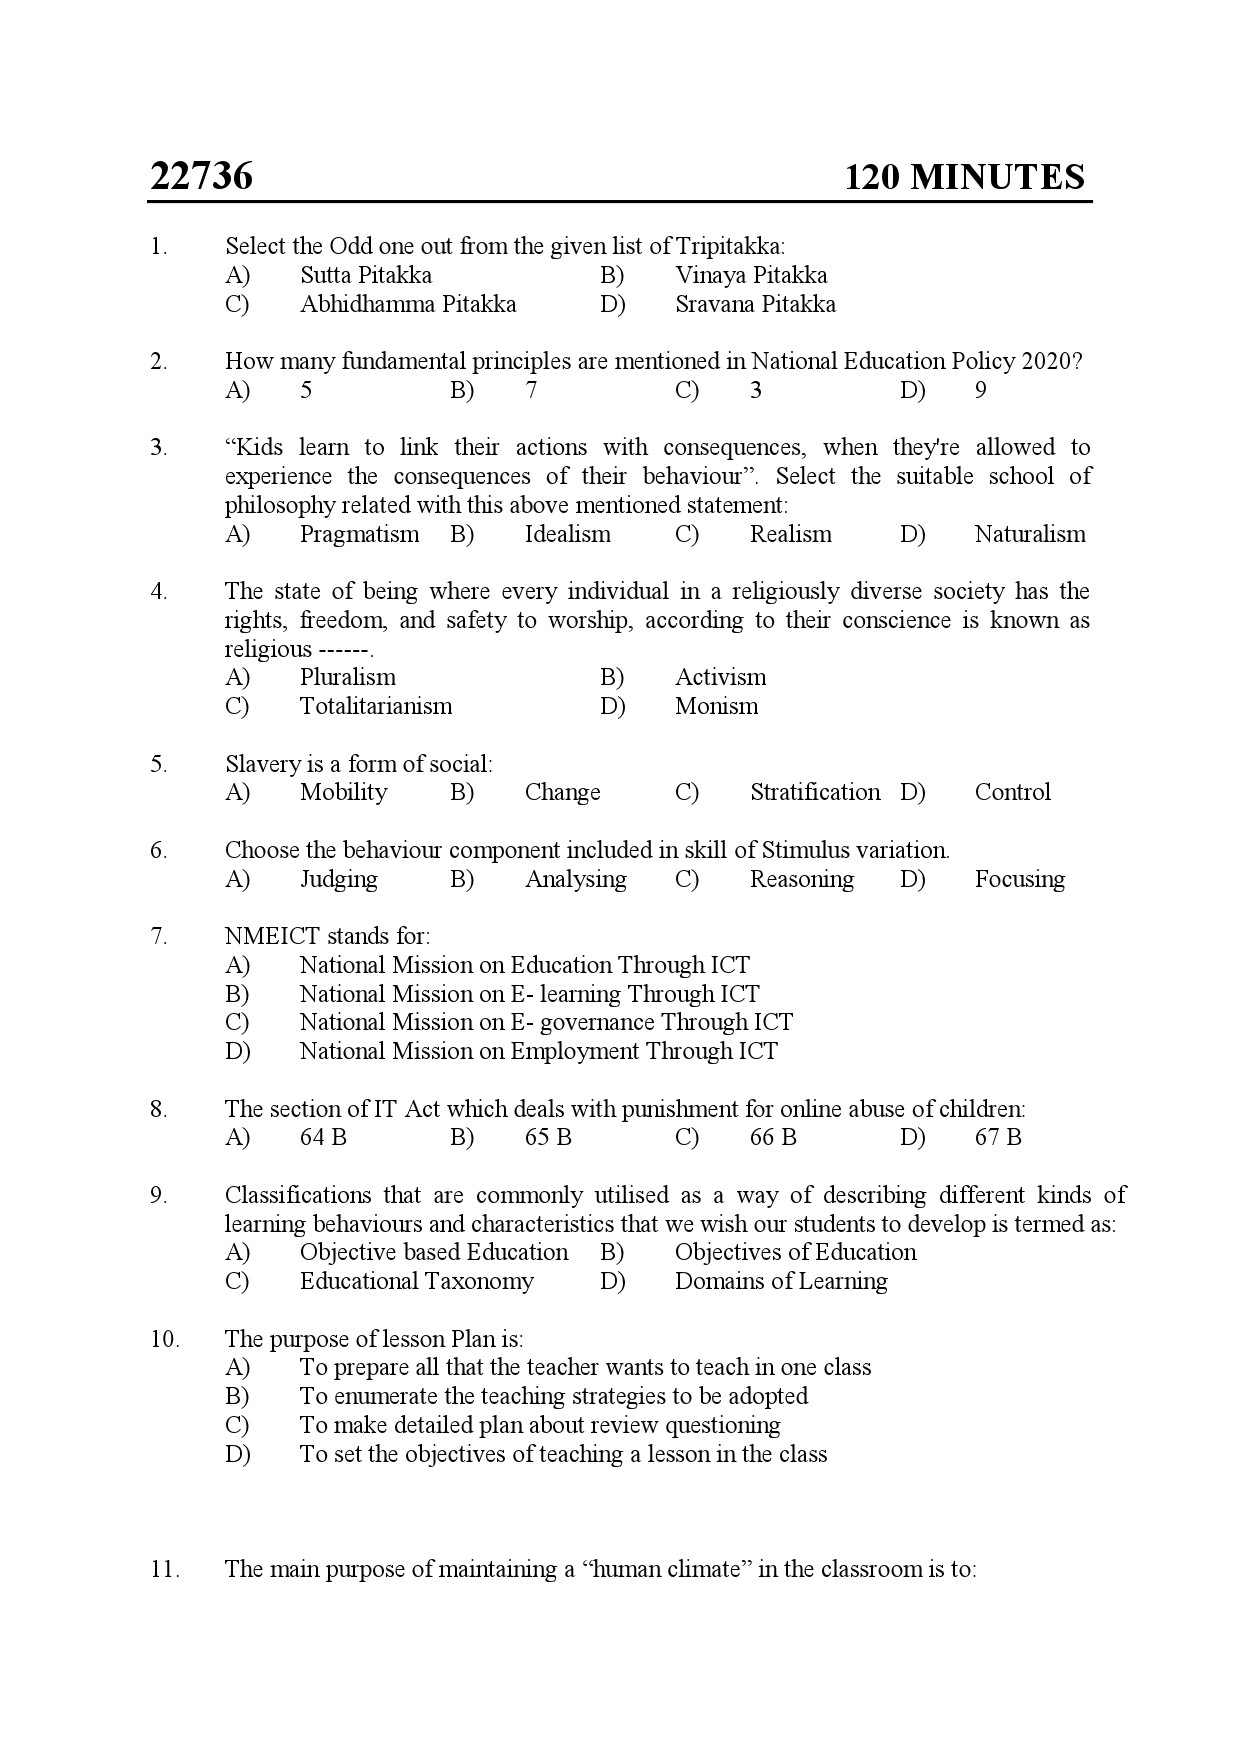 Kerala SET General Knowledge Exam Question Paper July 2022 1